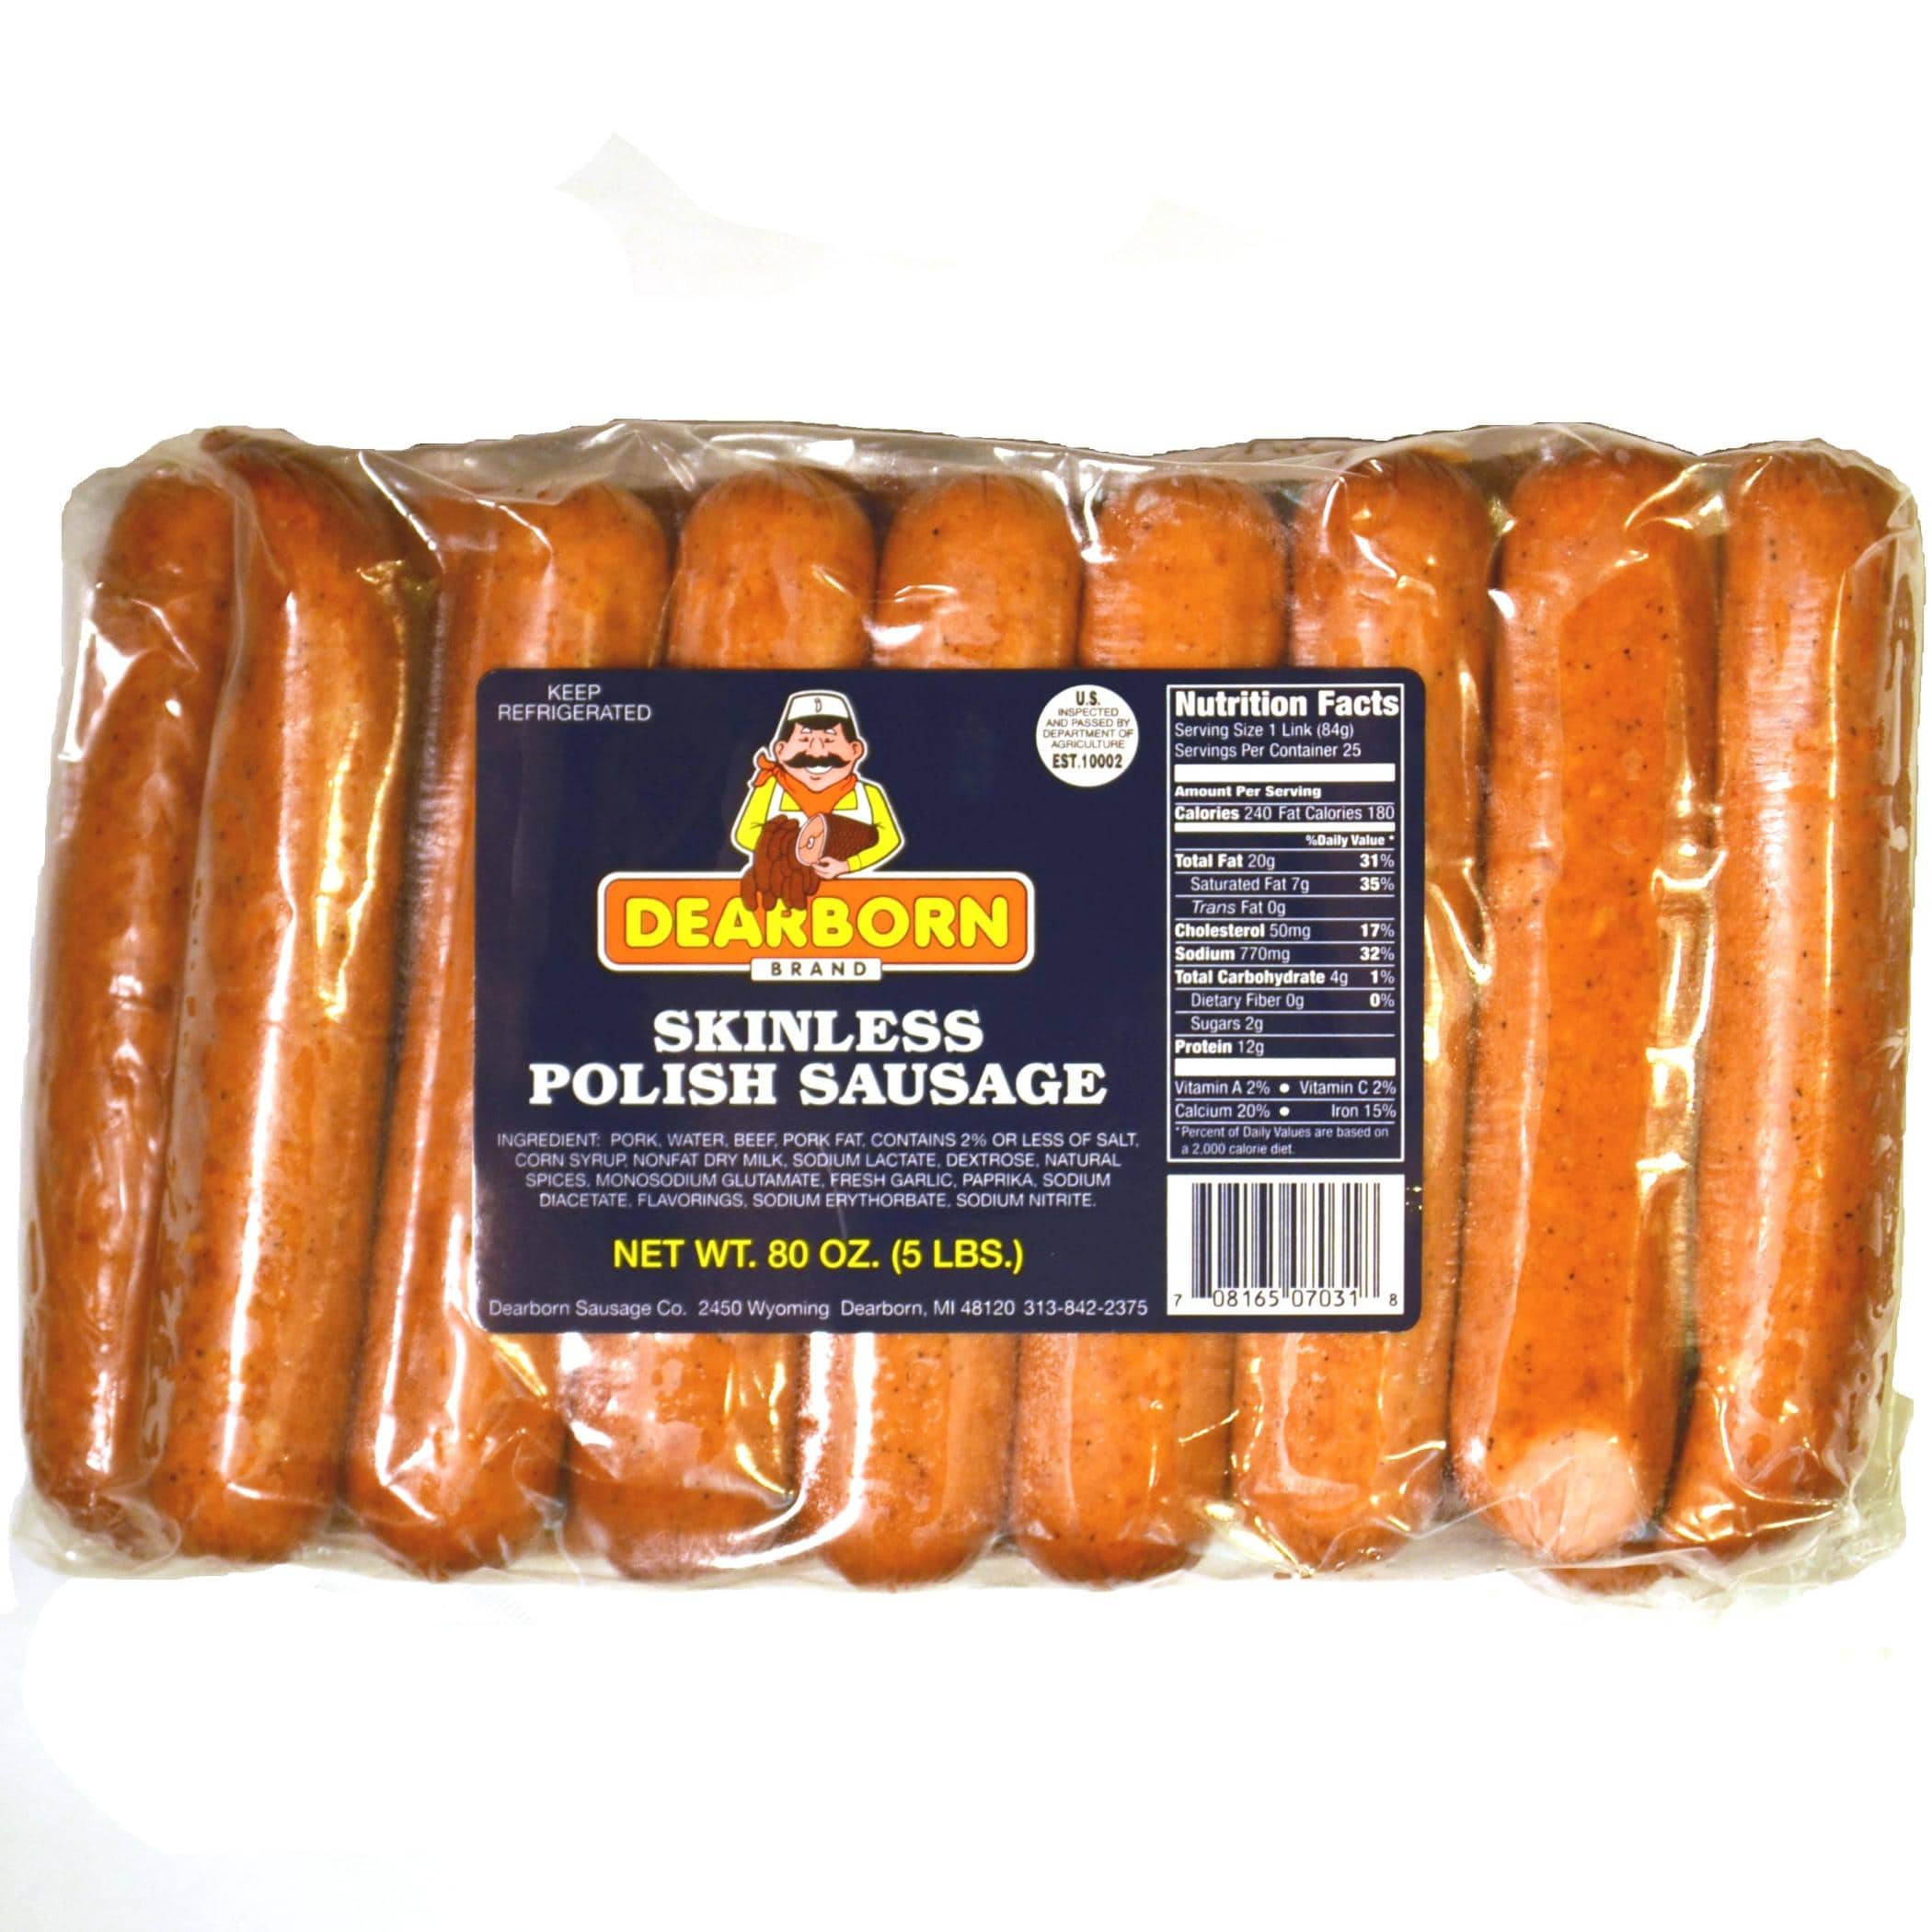 8534 5 To 1 Skinless Polish Sausage Pkg Dearborn Brand,What Is Whey Protein Powder